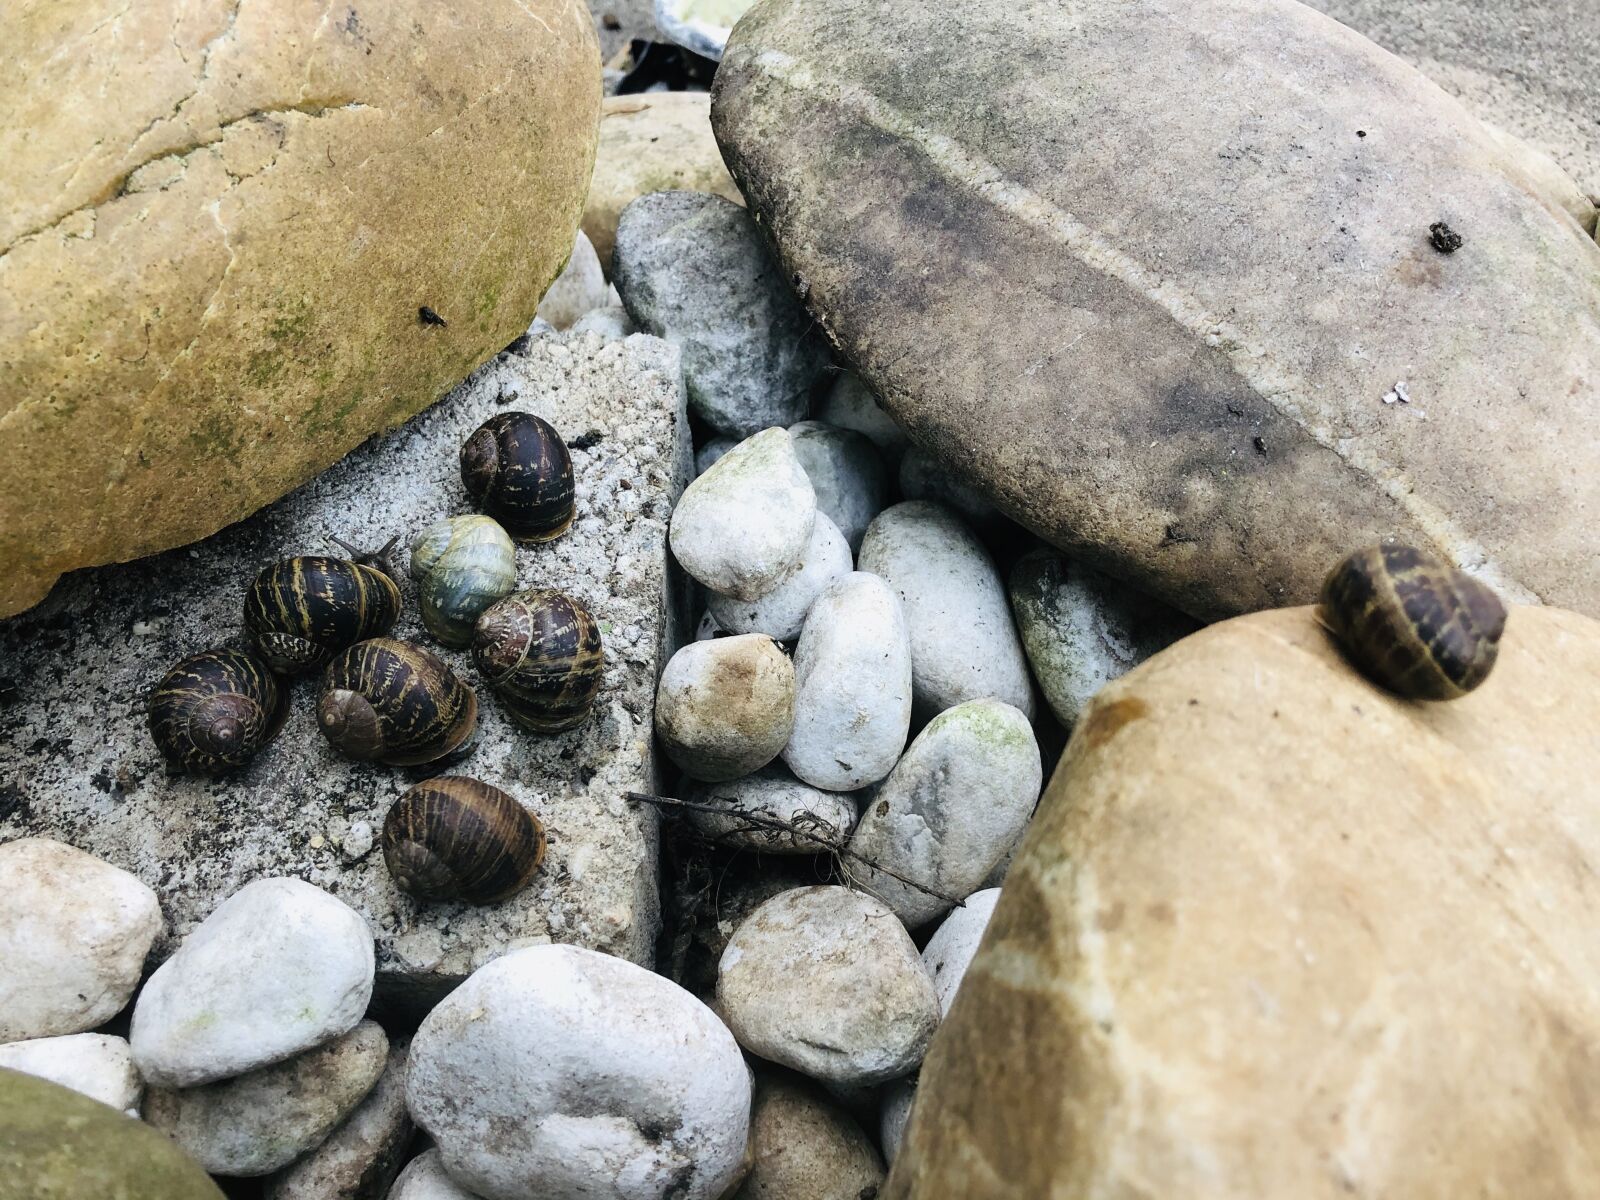 Apple iPhone 8 sample photo. Spotted snail, stones, nature photography